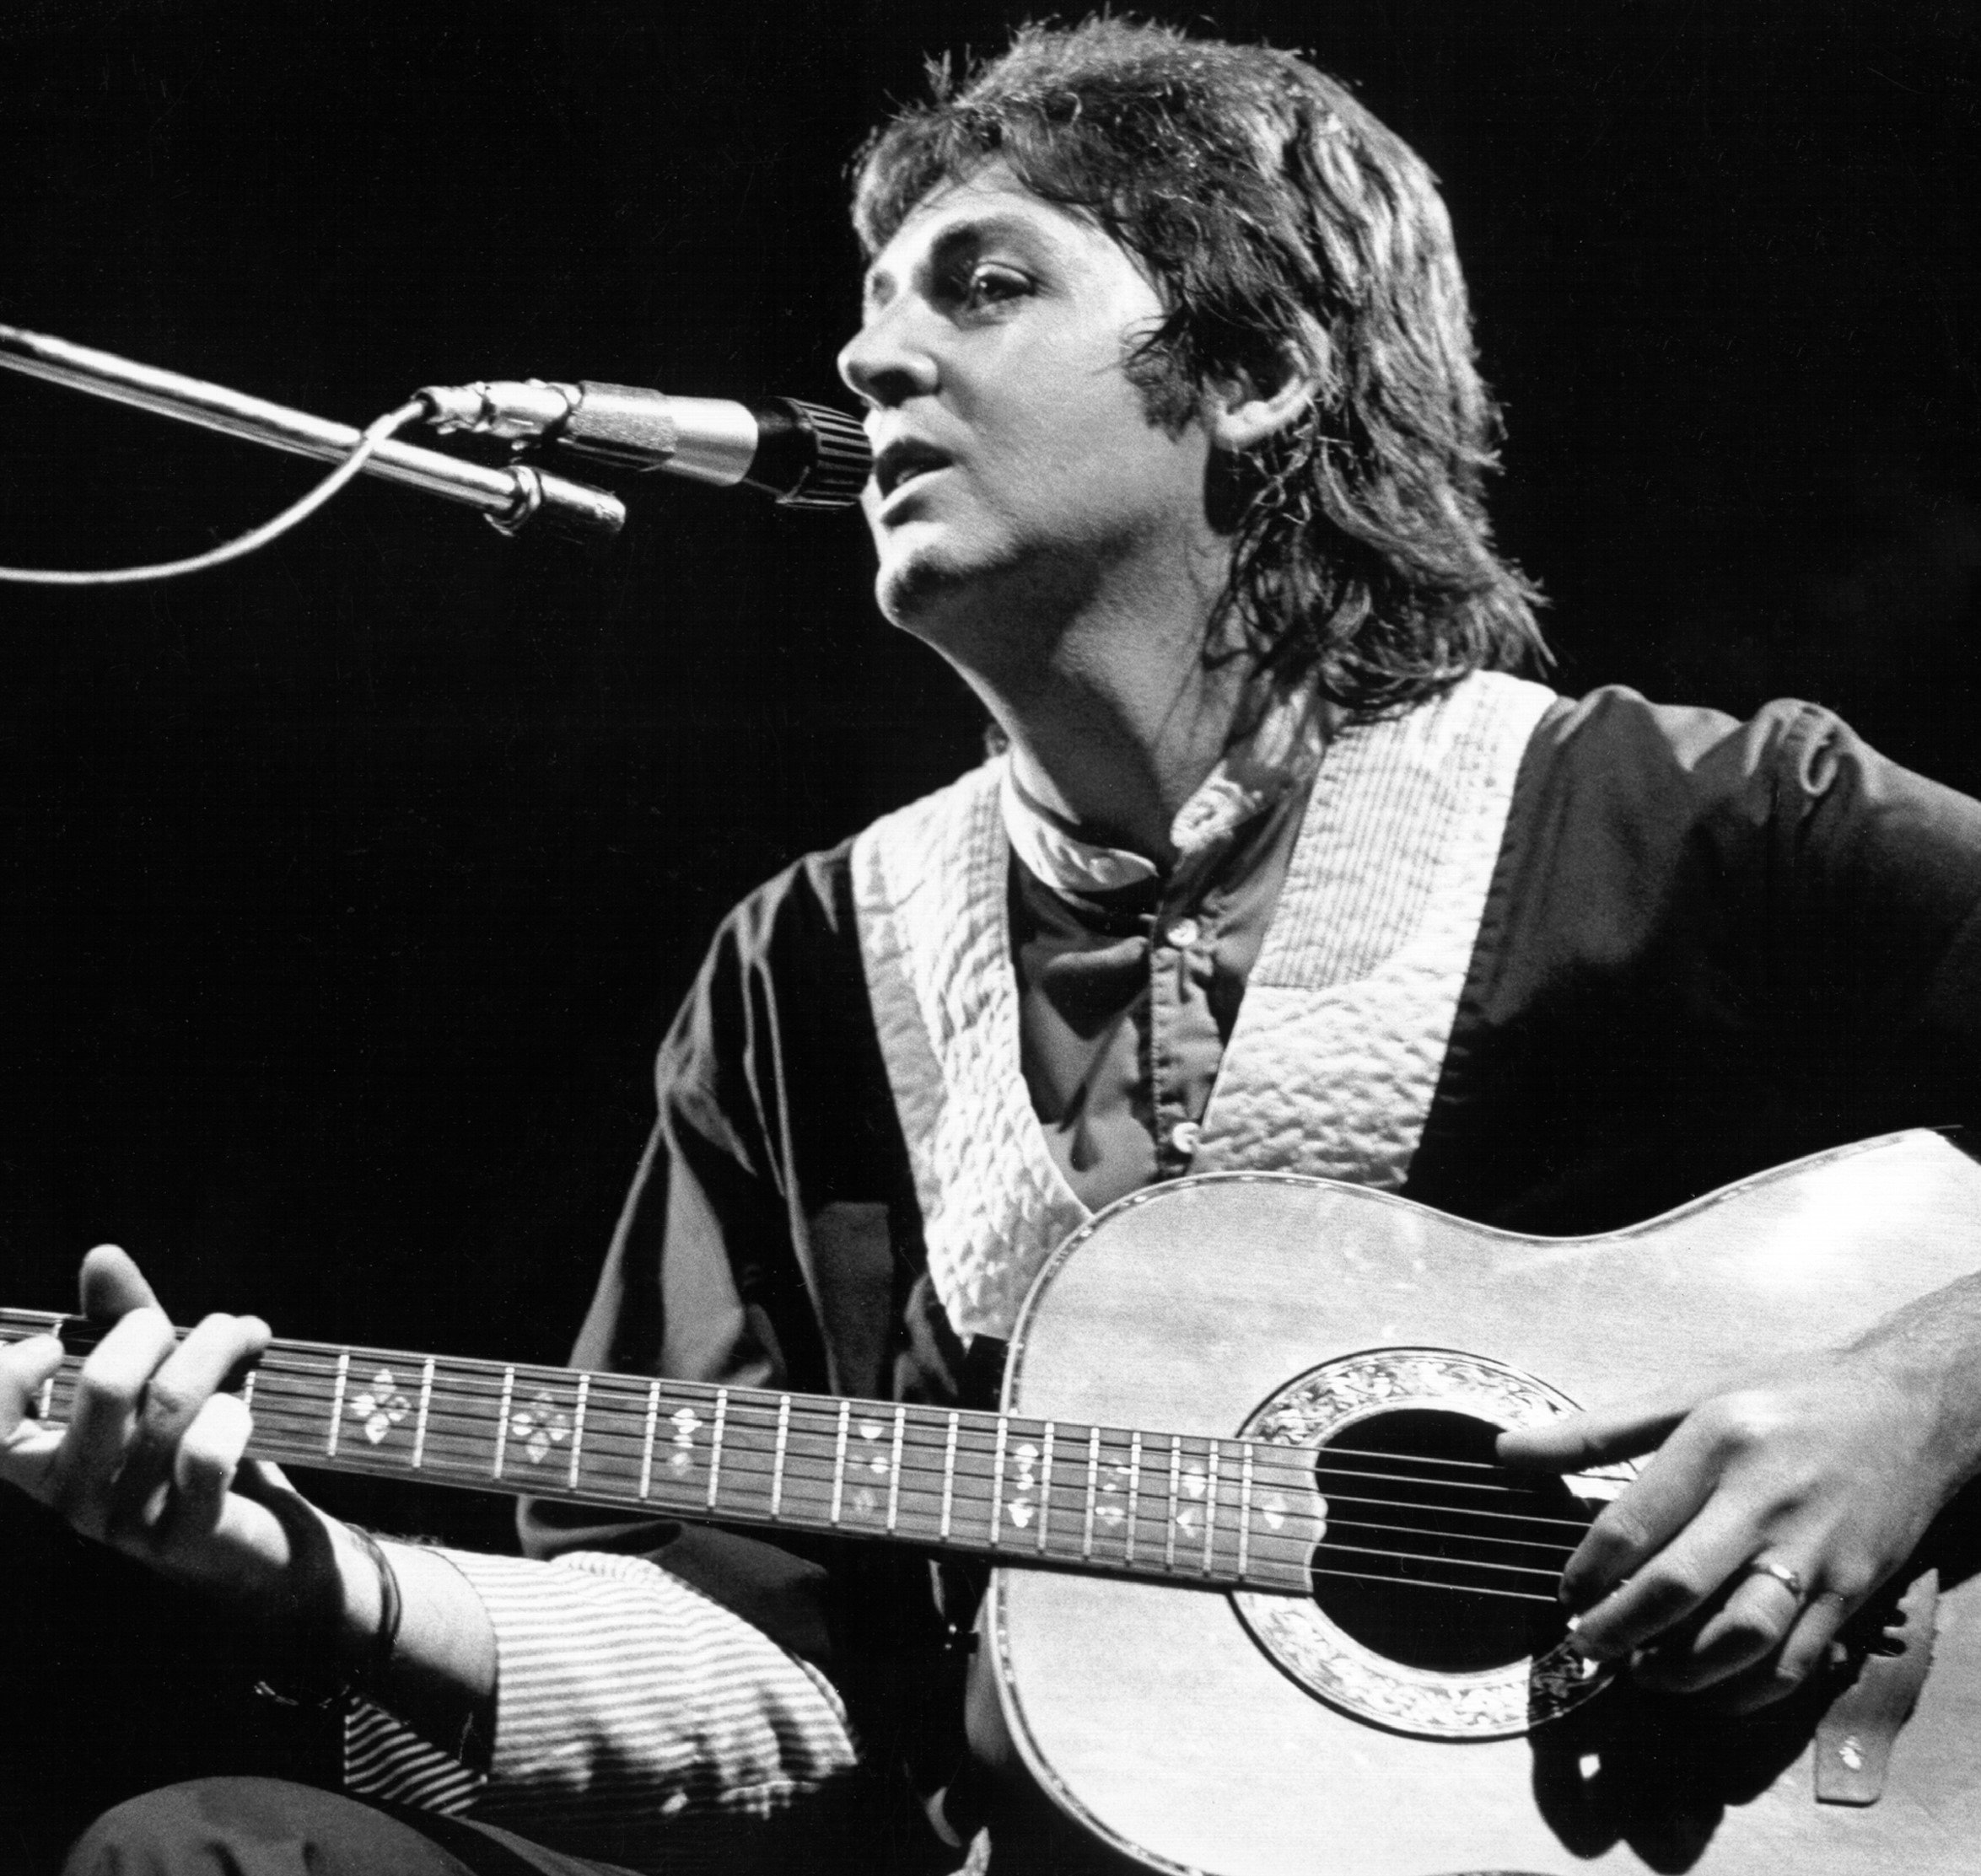 Paul McCartney with a guitar during the 'Band on the Run' era